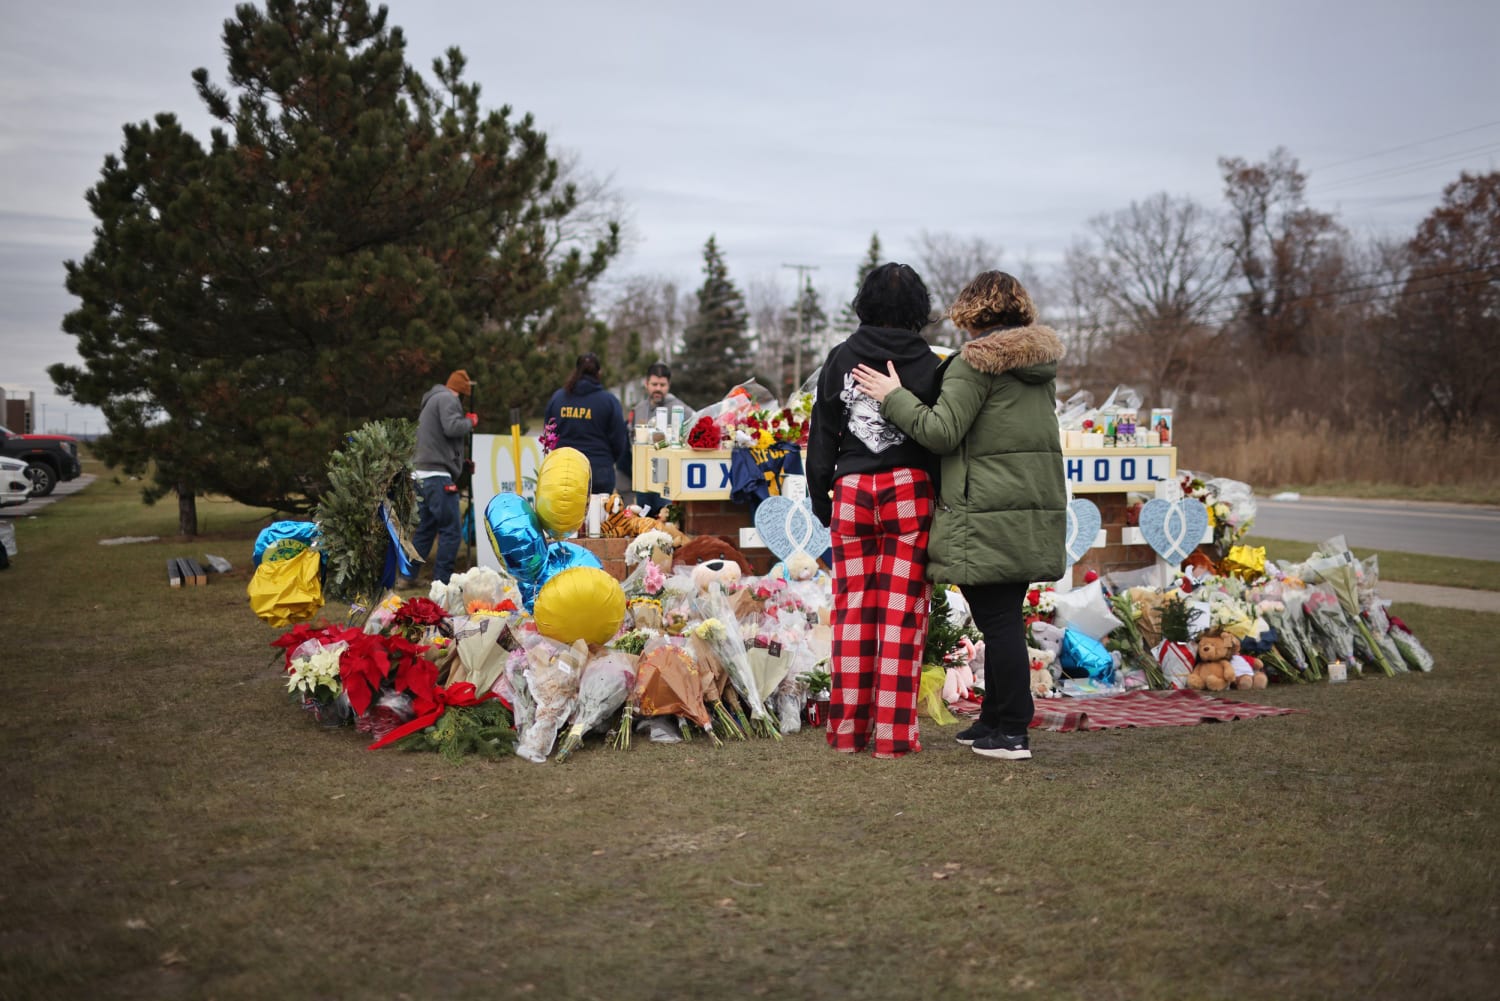 Michigan school district defends actions surrounding deadly November shooting in face of two lawsuits